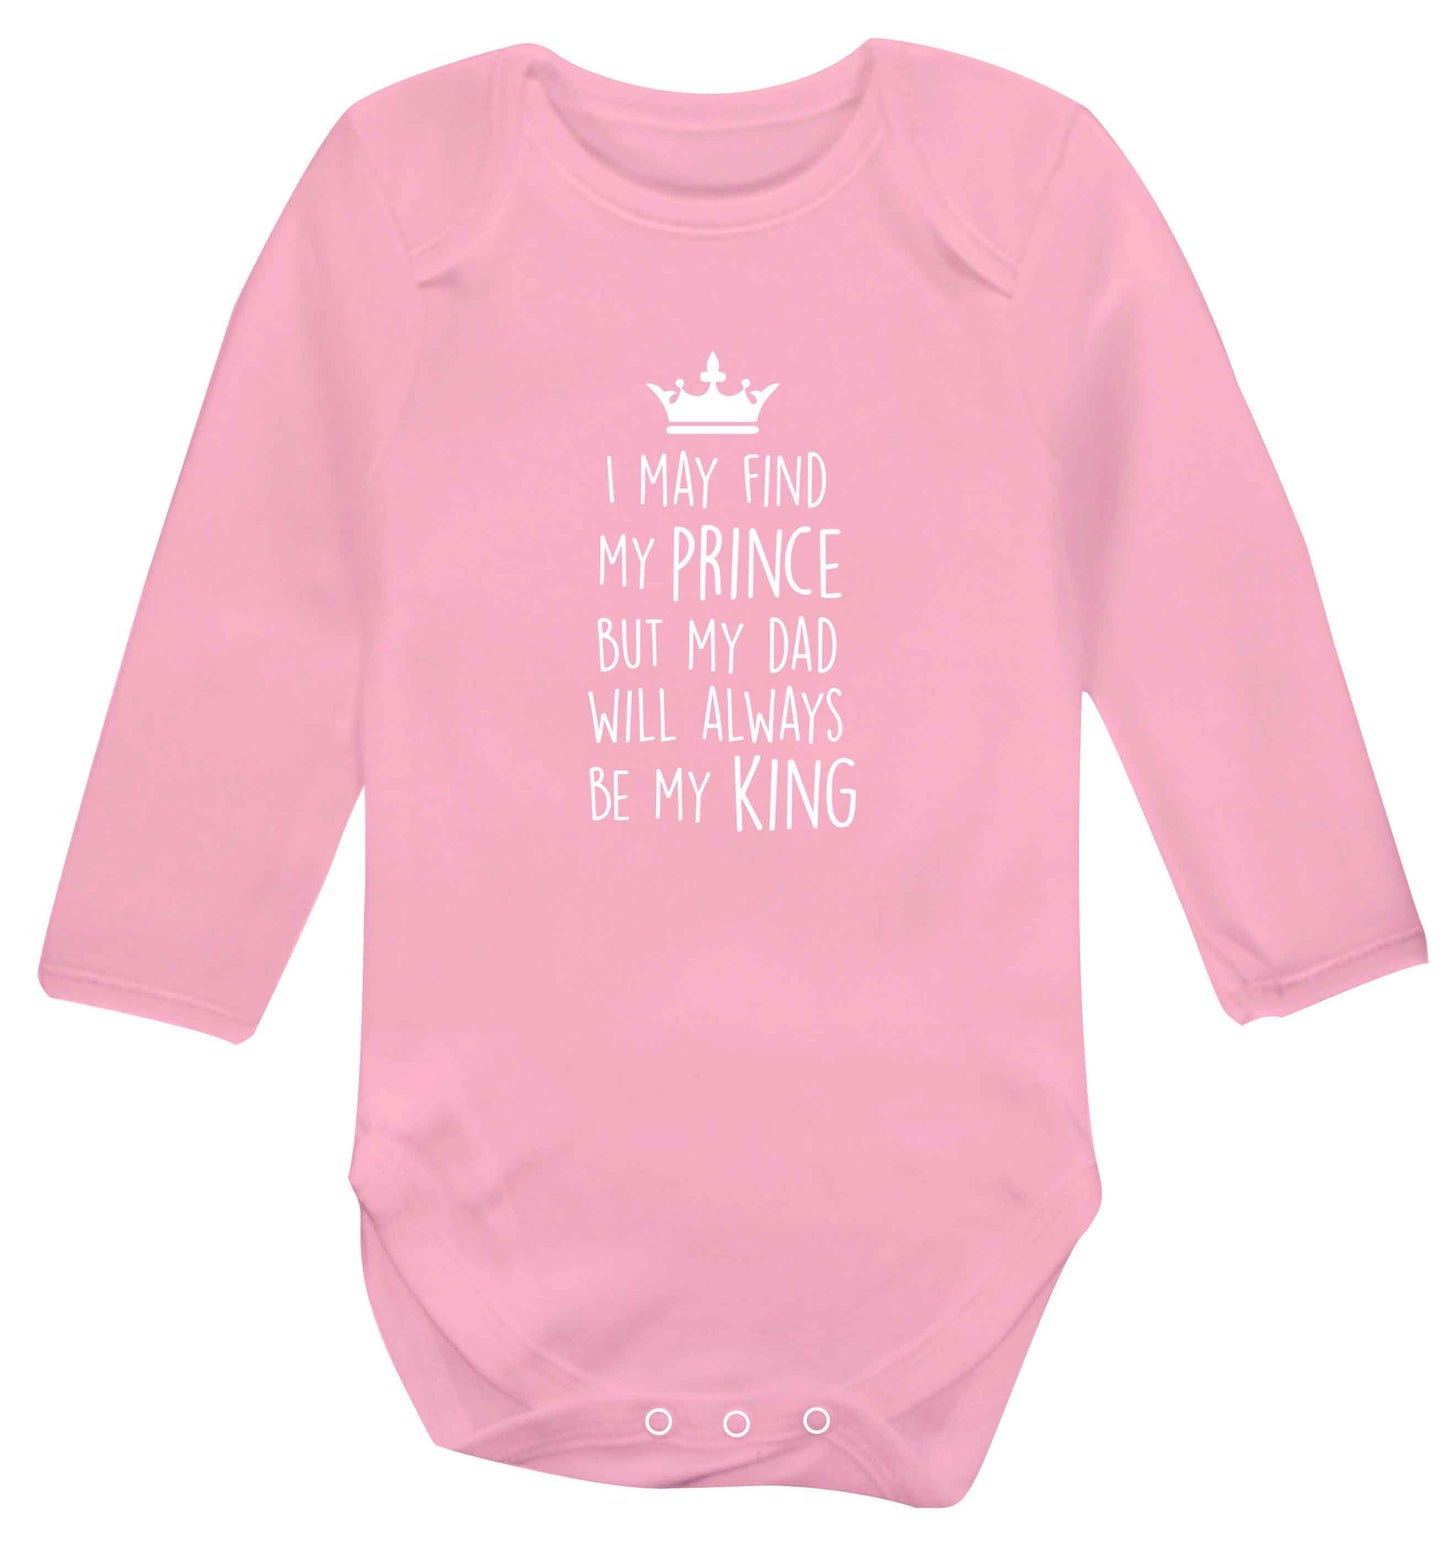 I may find my prince but my dad will always be my king baby vest long sleeved pale pink 6-12 months